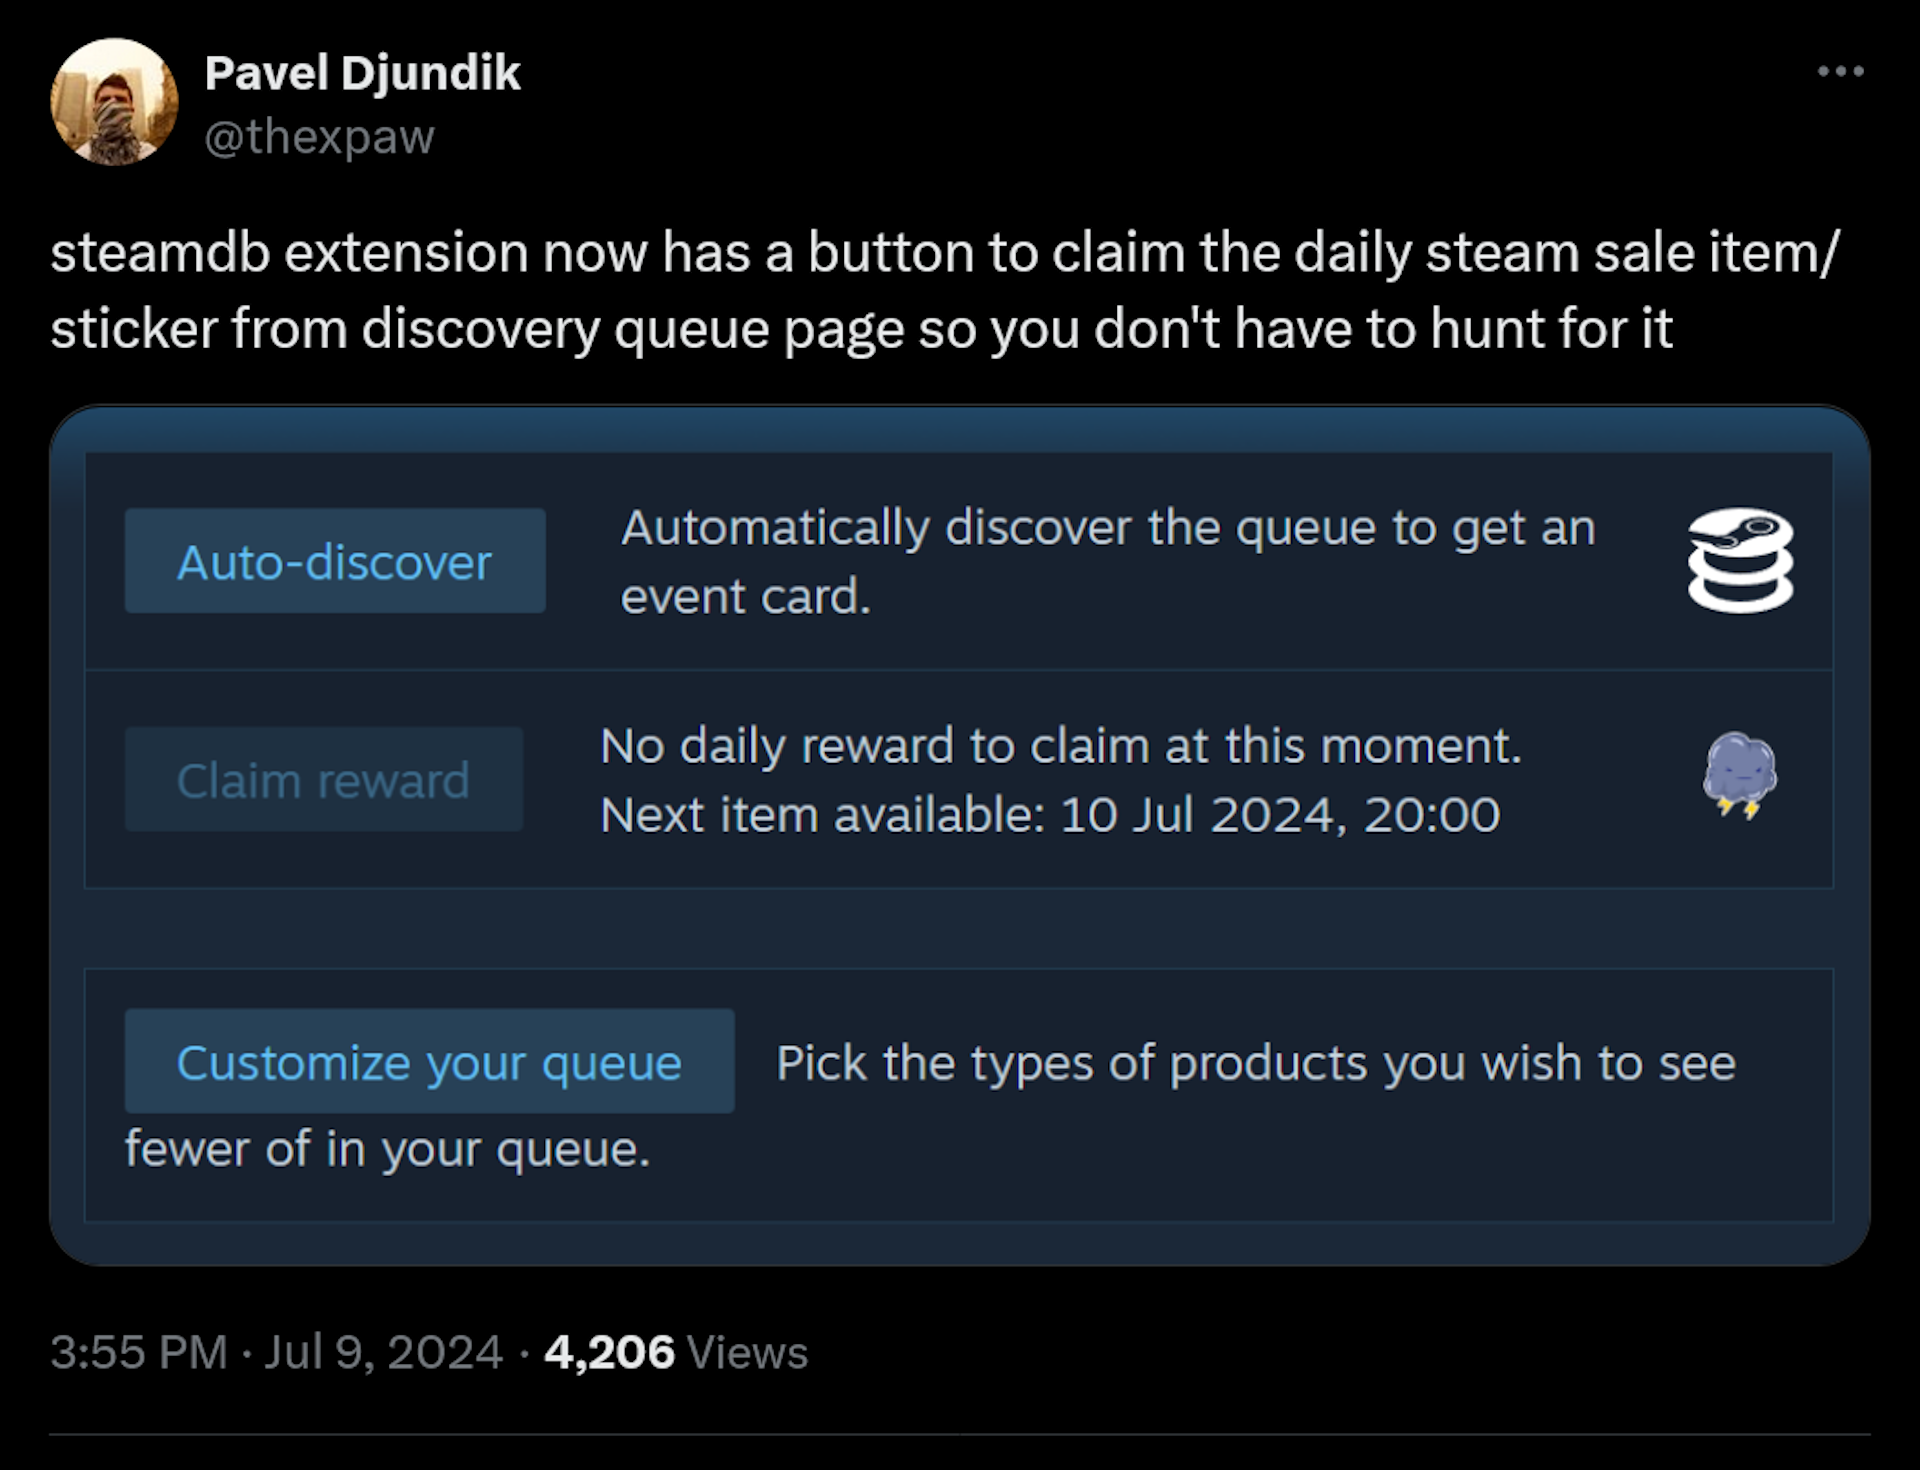 steamdb extension now has a button to claim the daily steam sale item/sticker from discovery queue page so you don't have to hunt for it